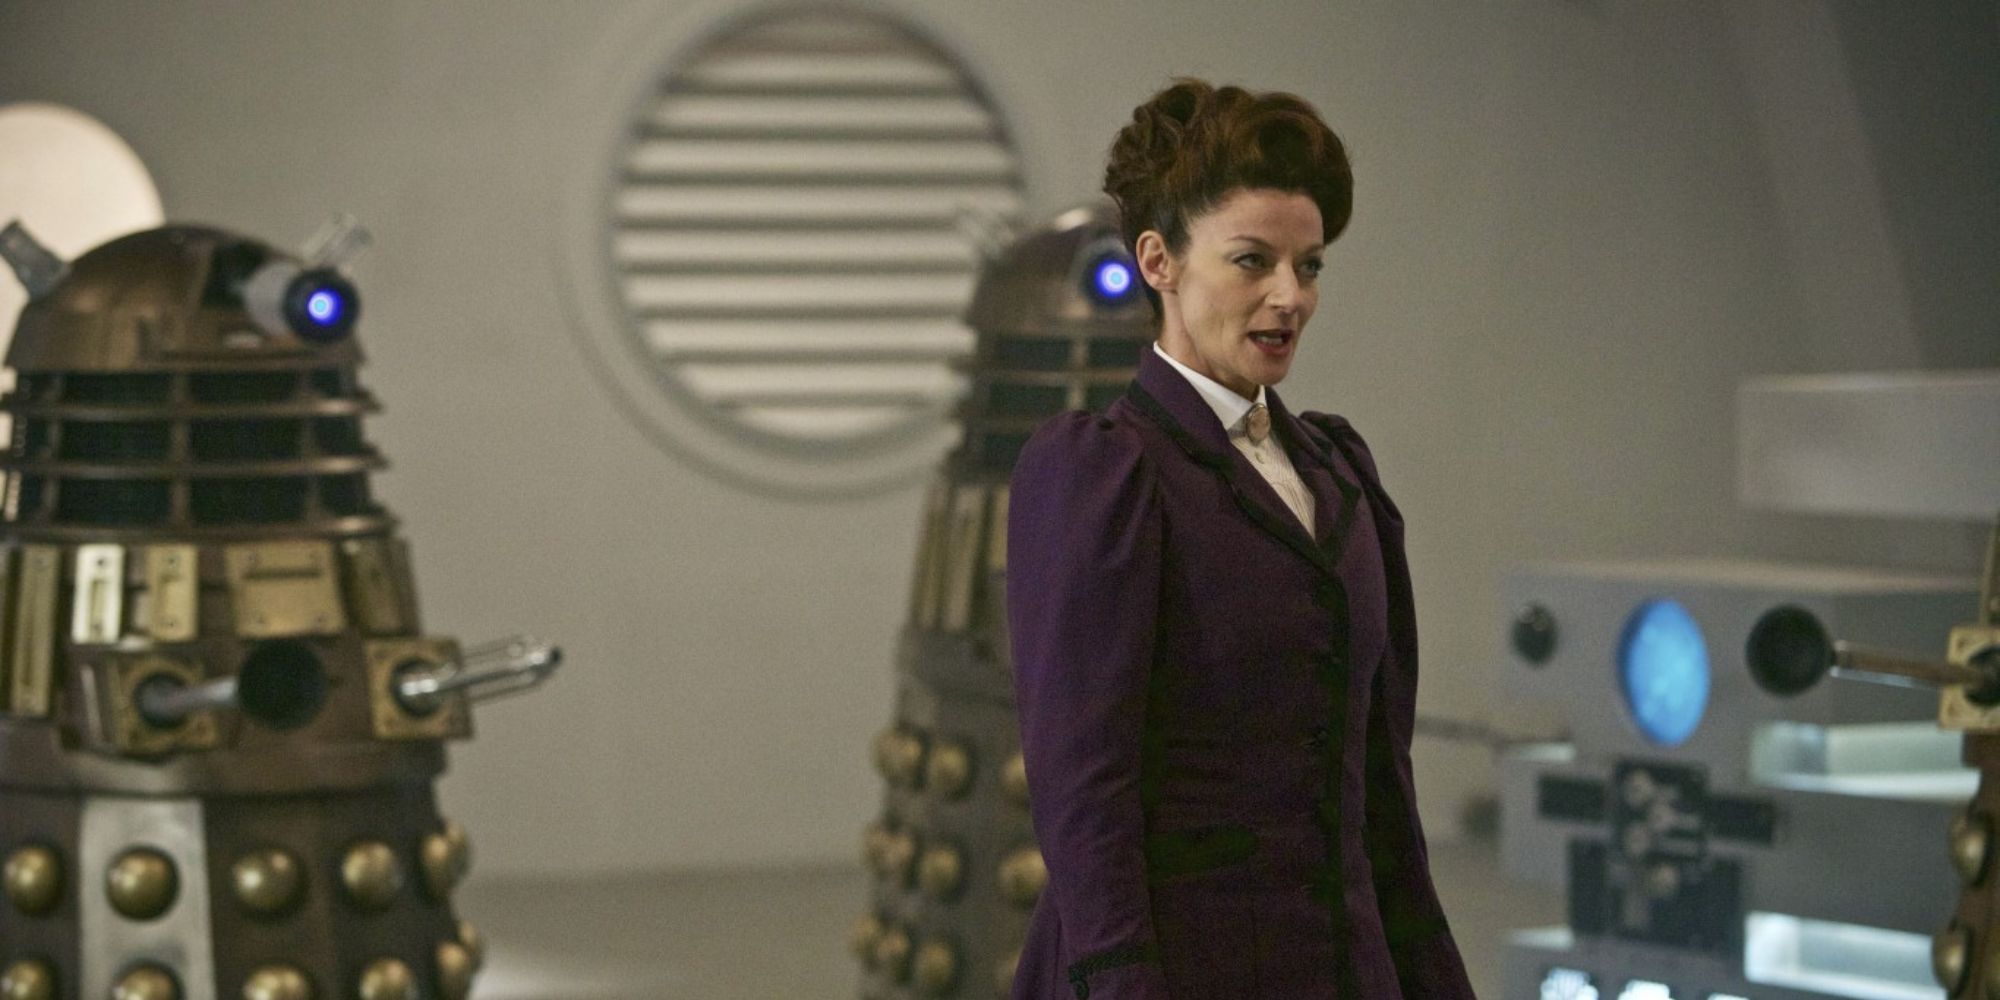 Missy with Daleks in Doctor Who